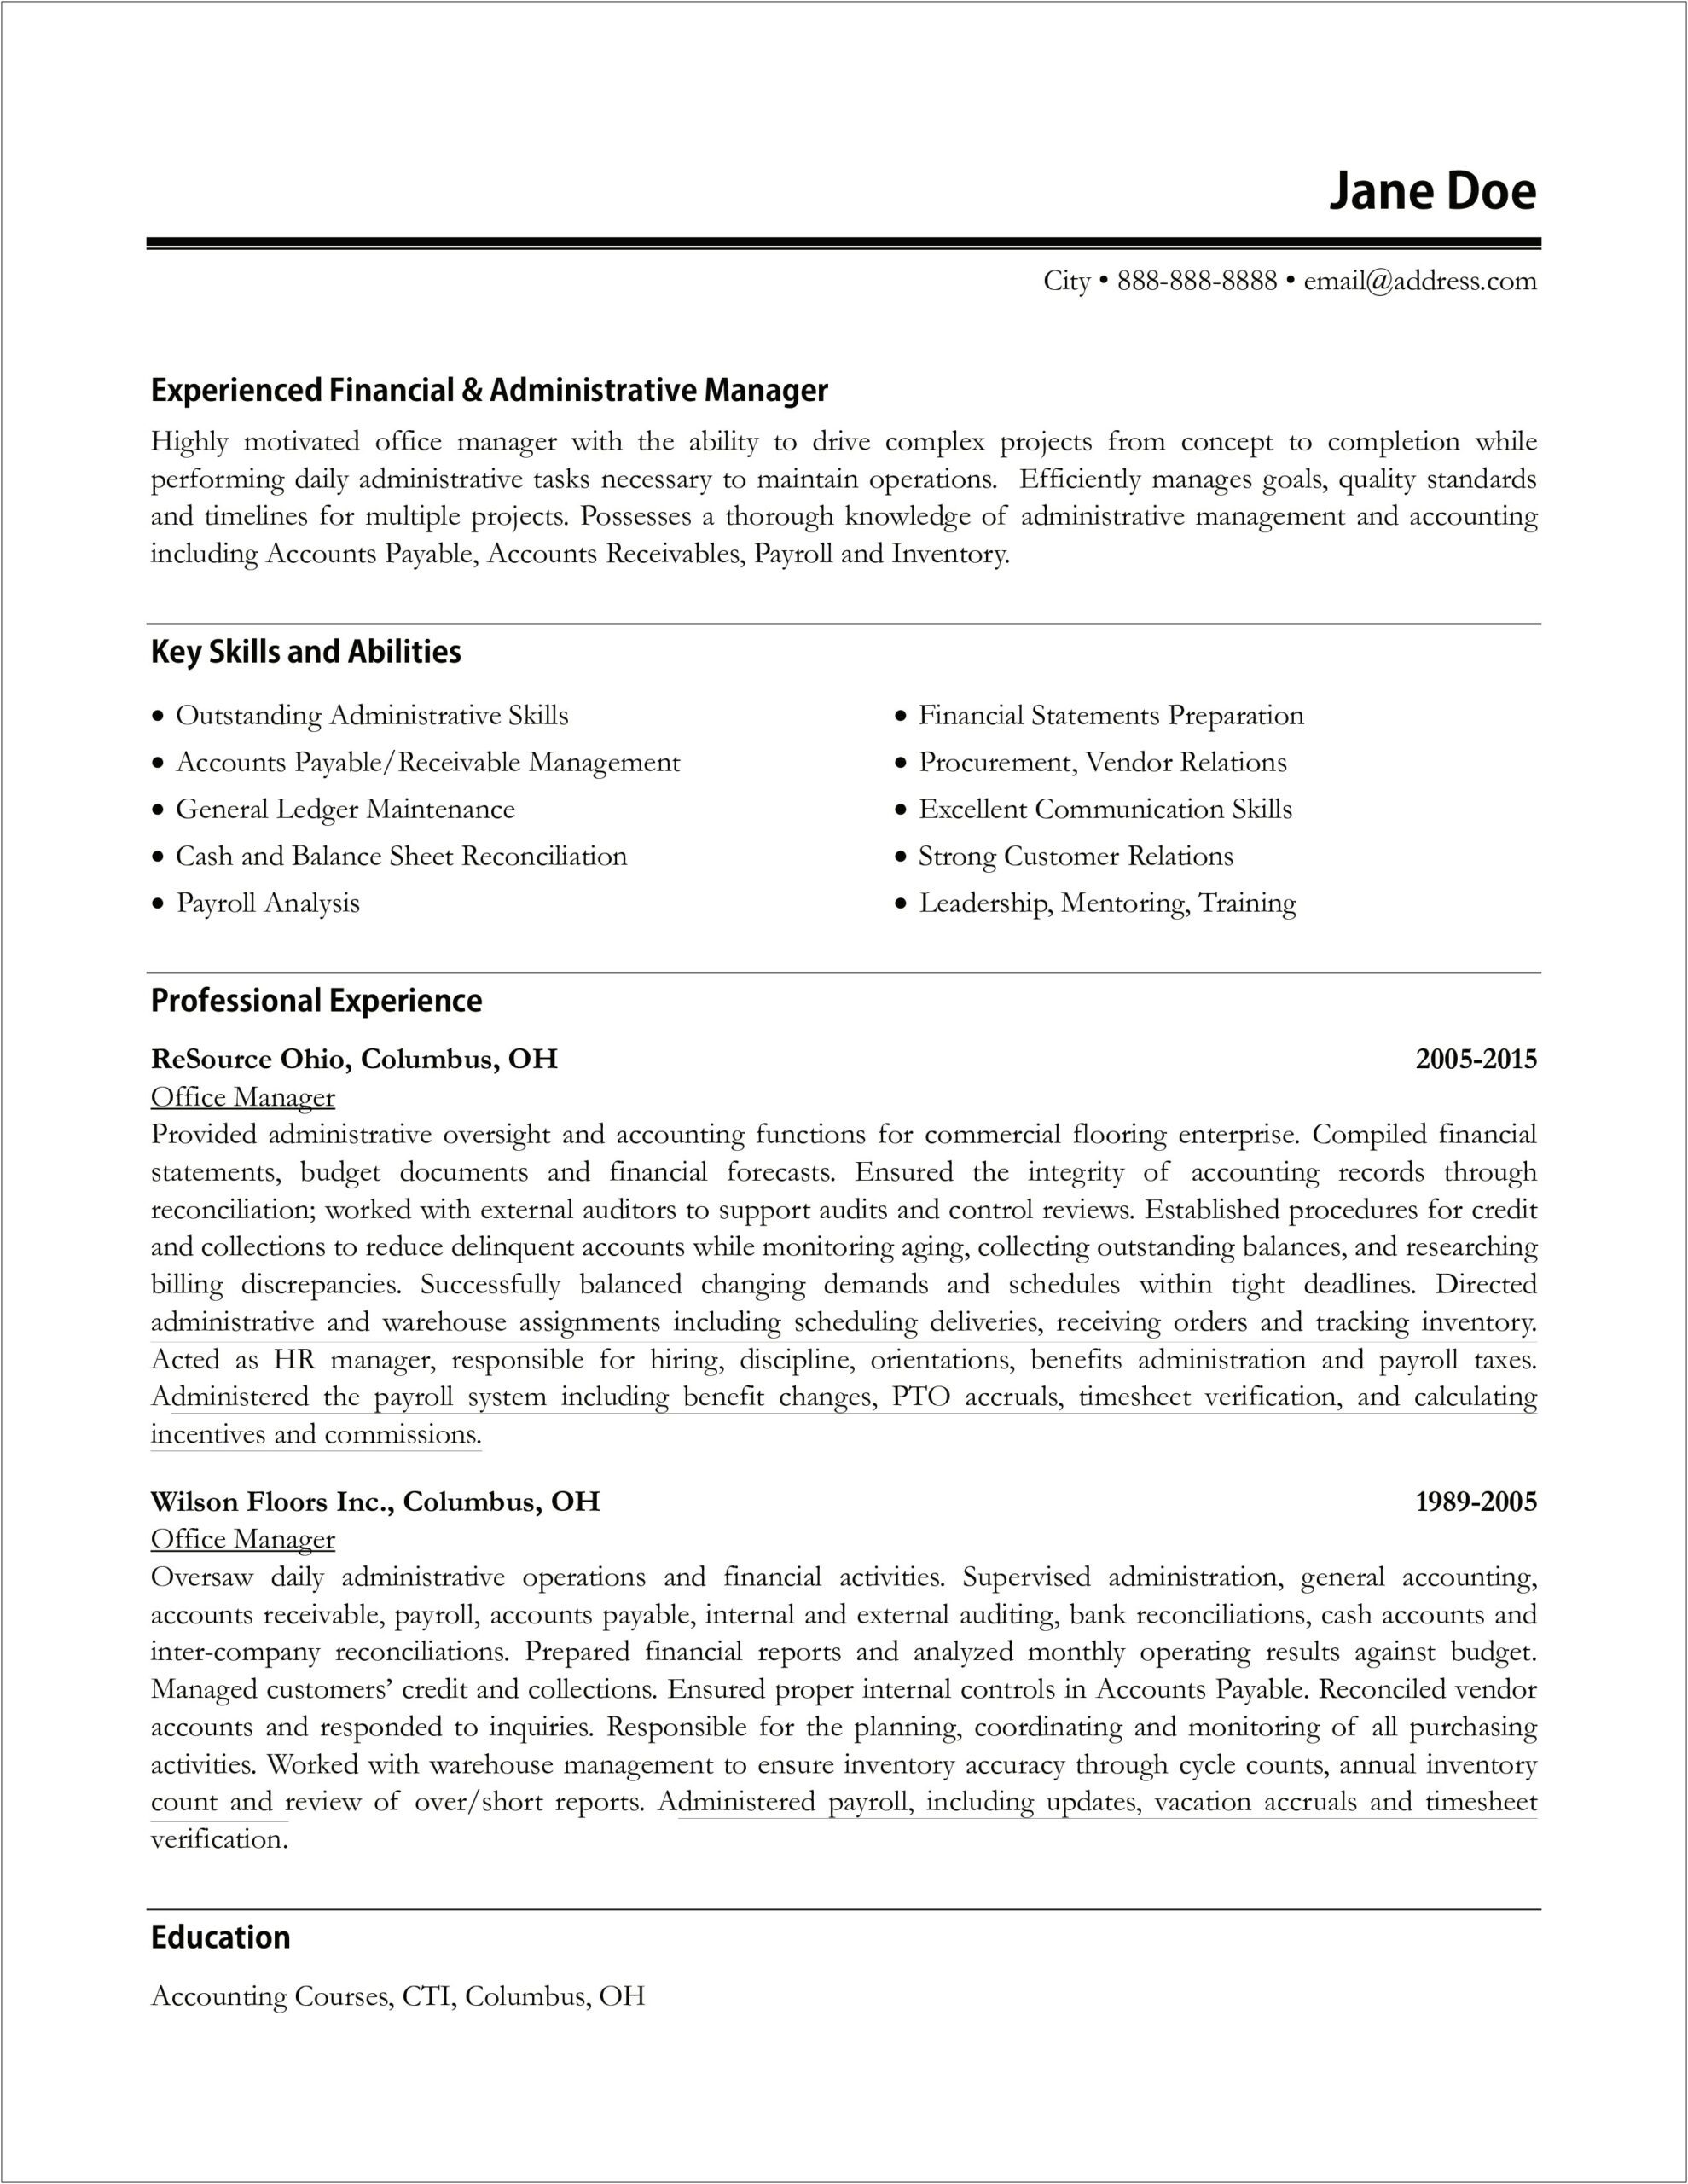 Resume Example For An Accounts Receivable Manager